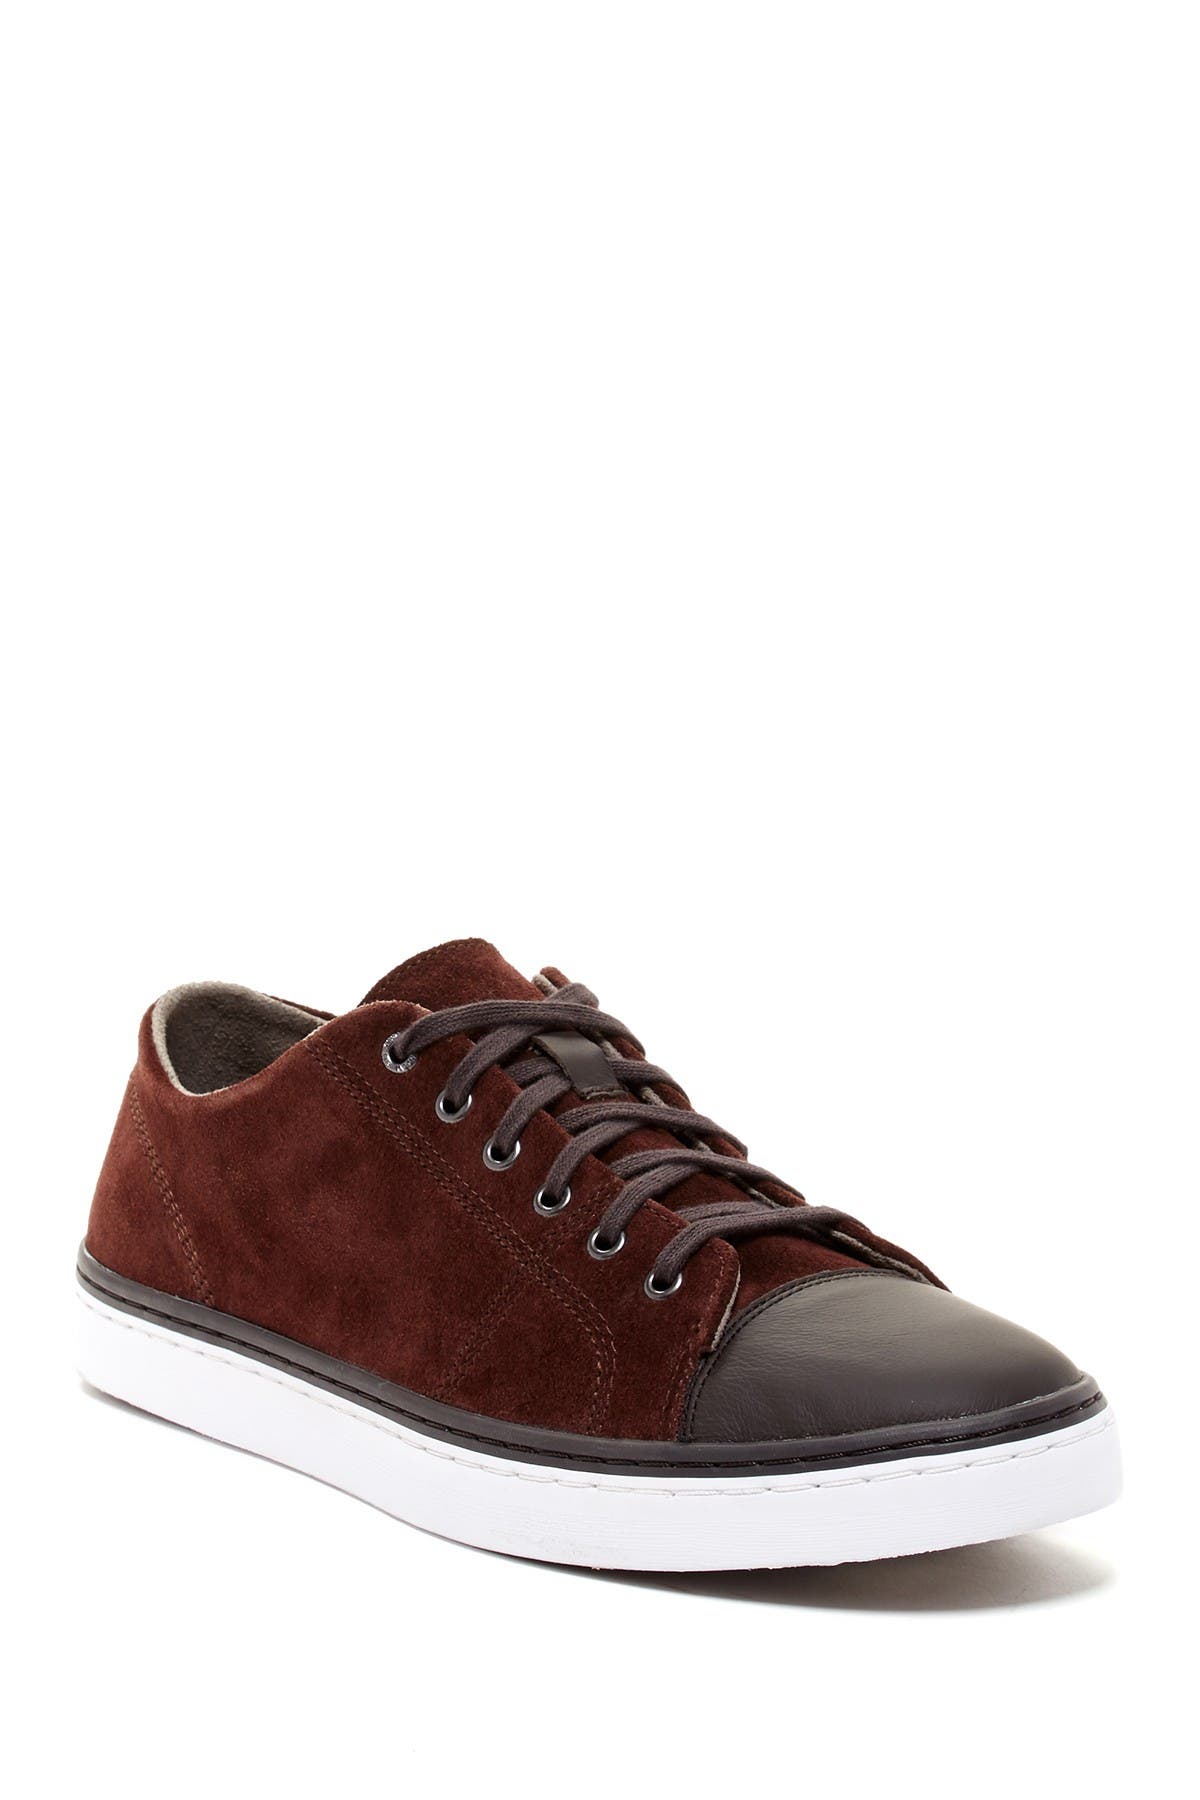 cole haan falmouth